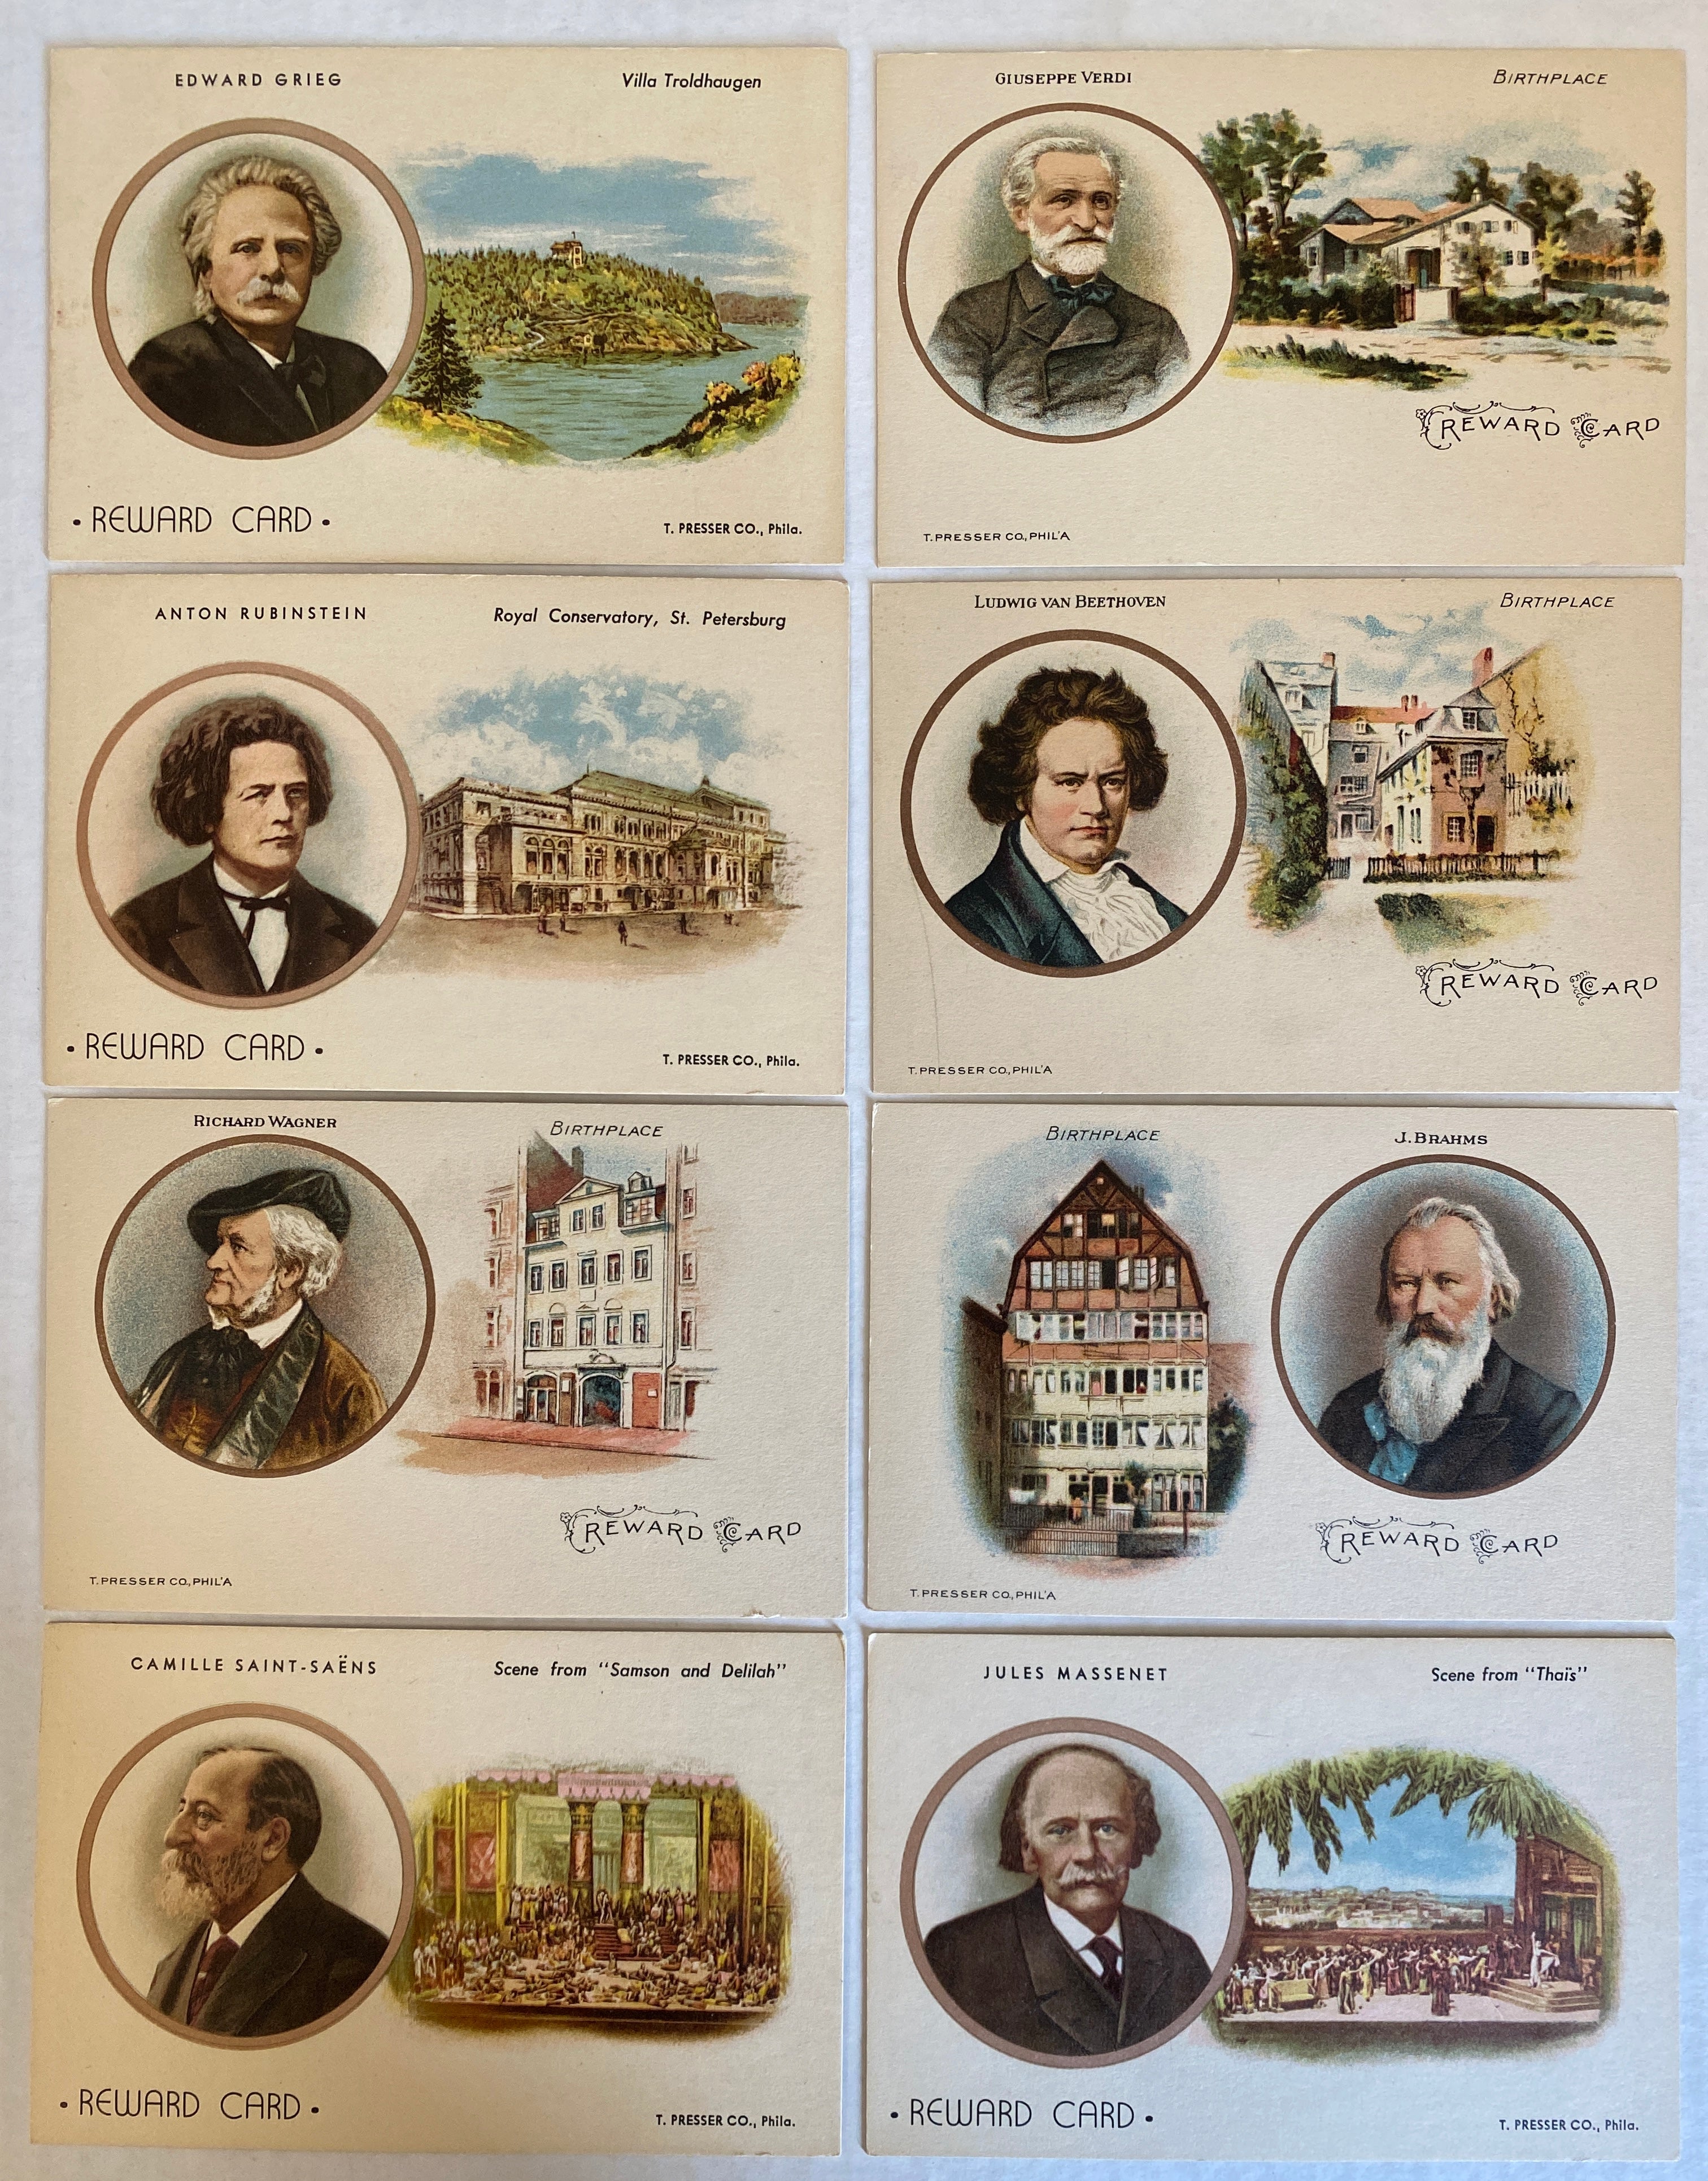 22 Presser Series Music Reward Cards From Early 1900s